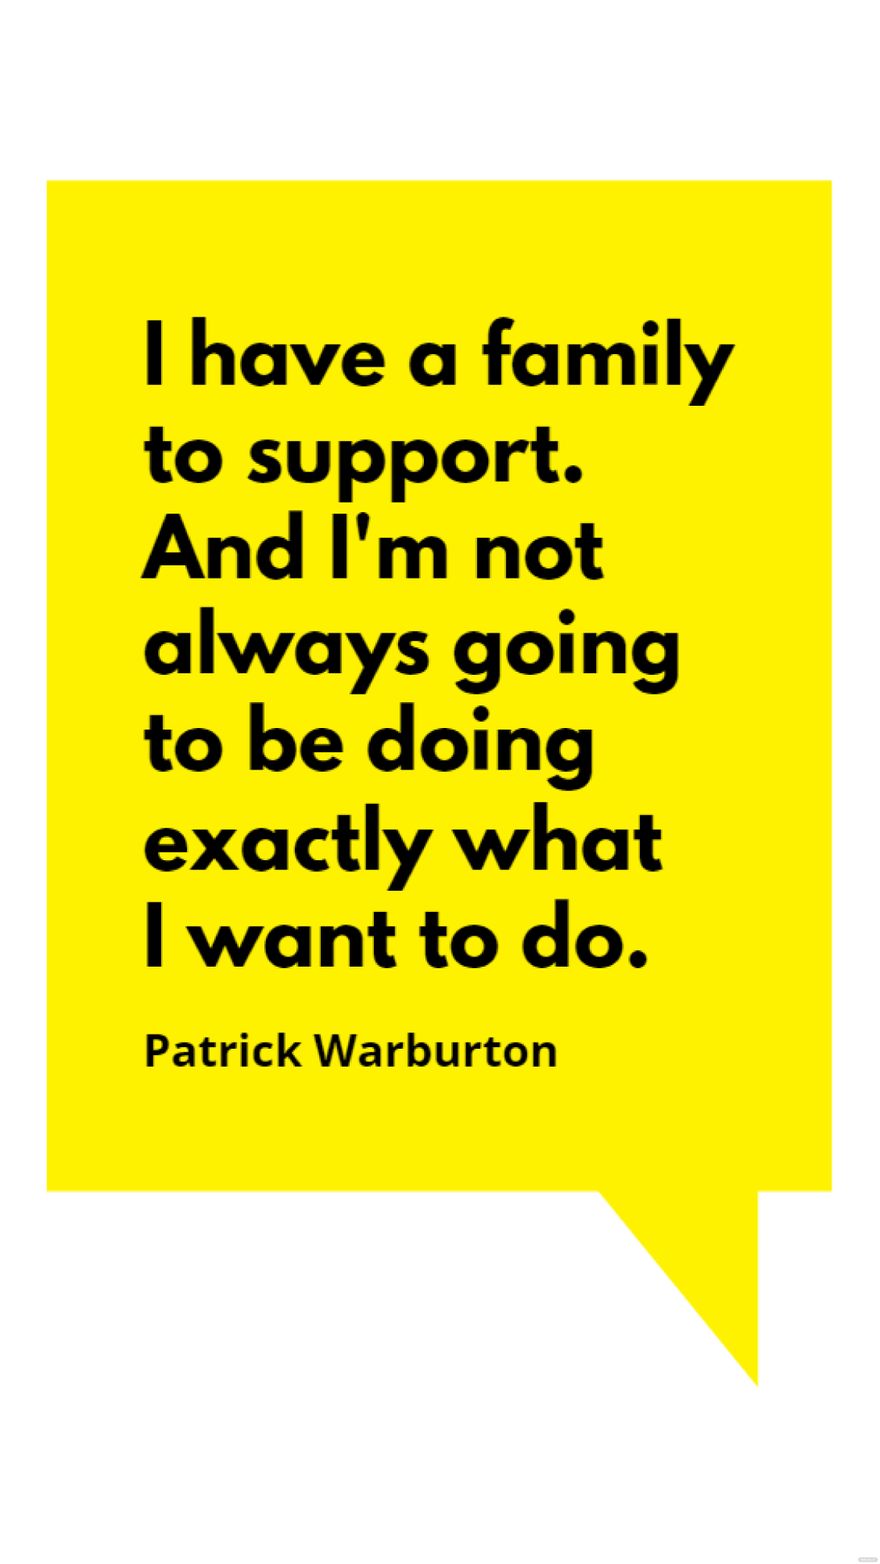 Free Patrick Warburton - I have a family to support. And I'm not always going to be doing exactly what I want to do.